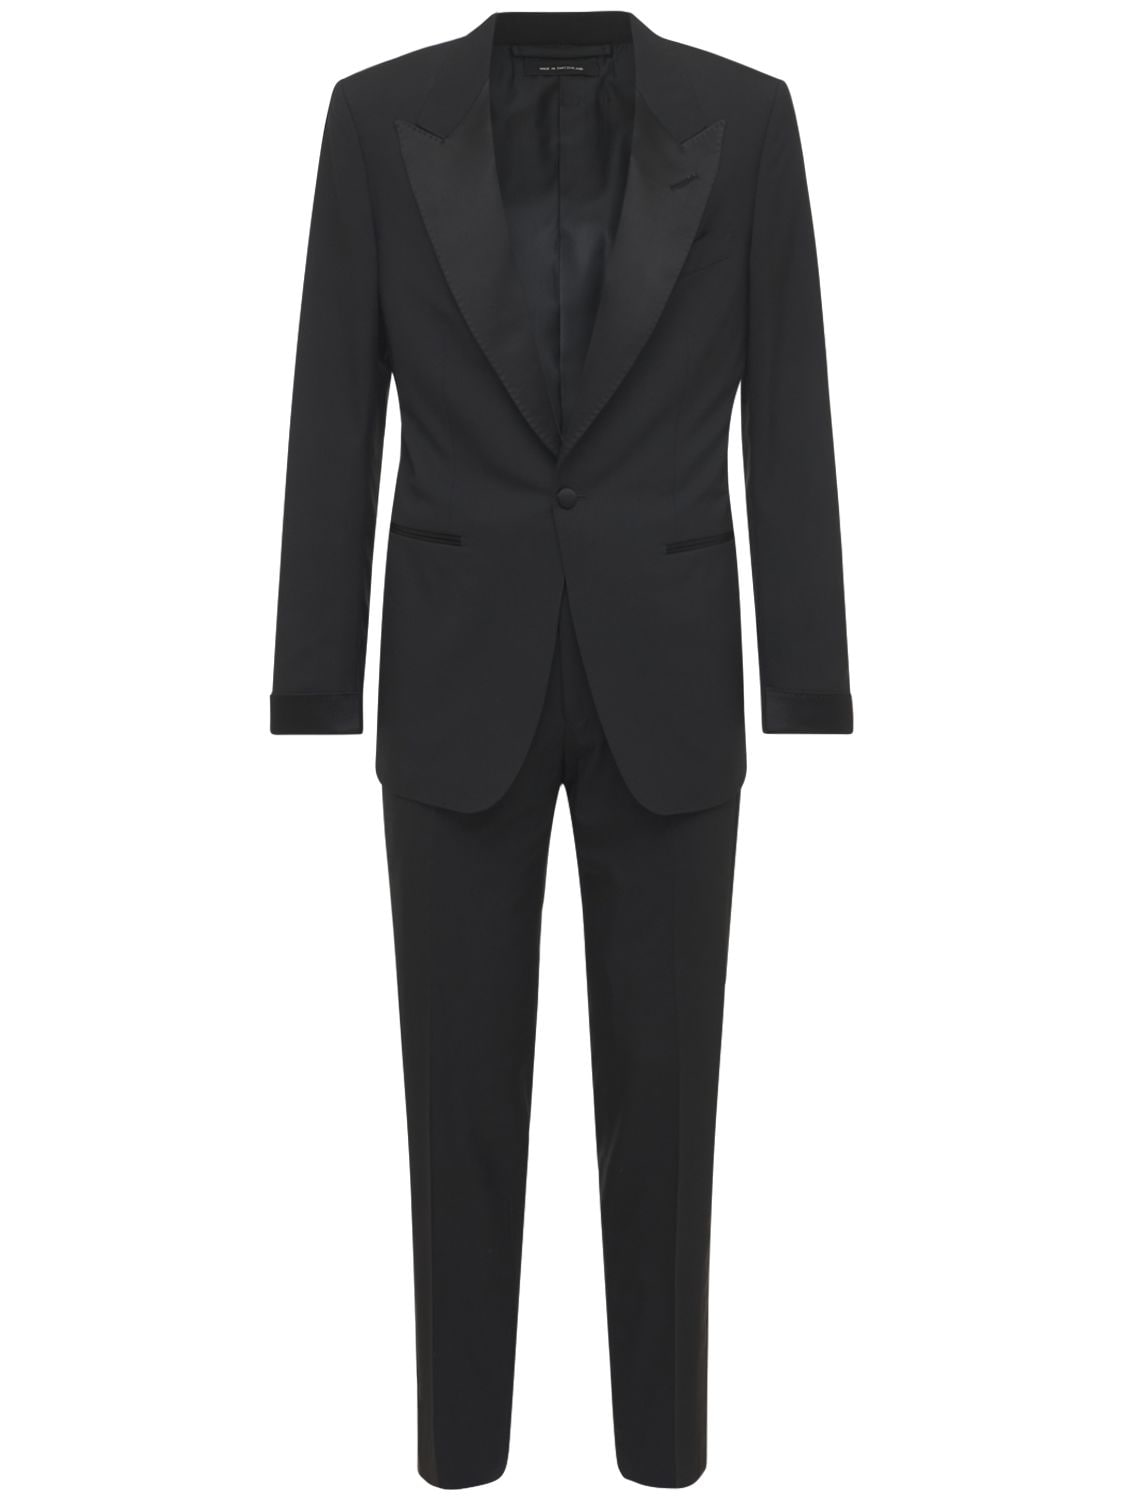 Tom Ford Plain Weave Wool Evening Suit In Black